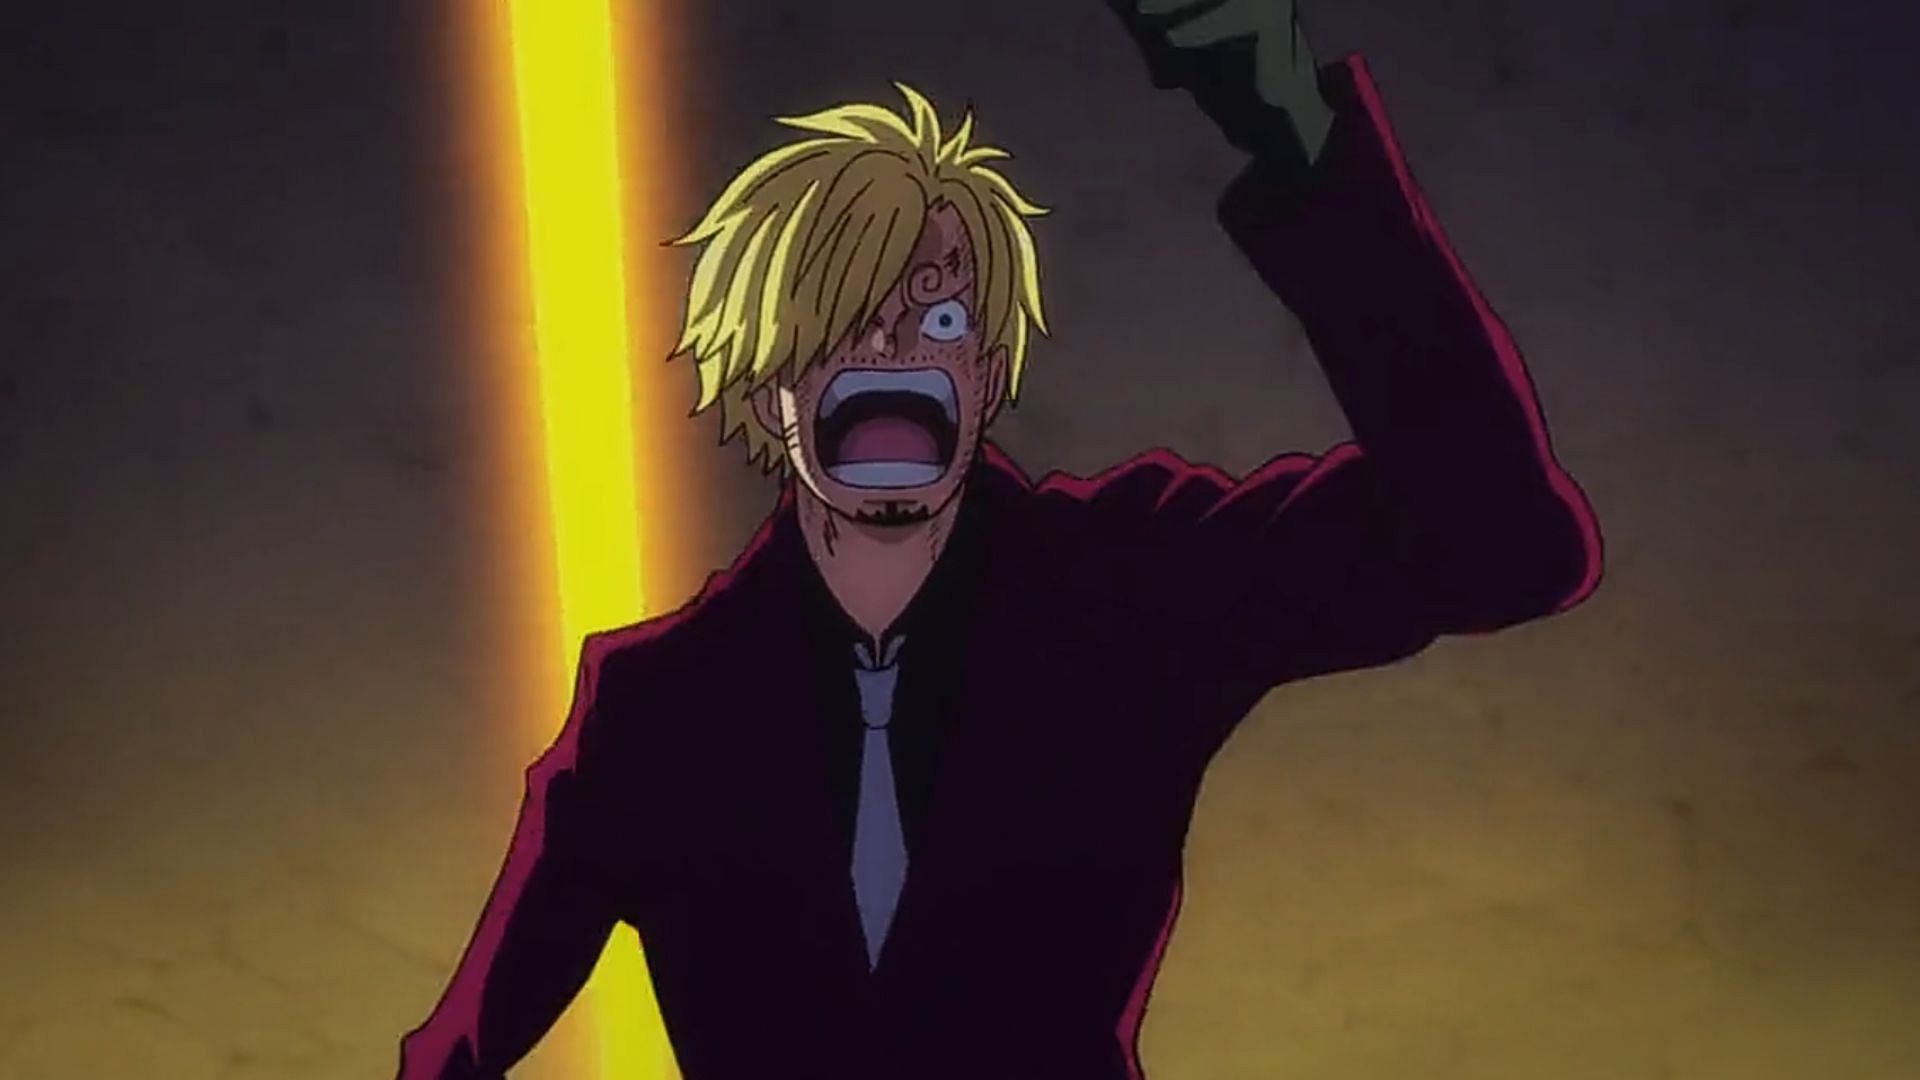 Sanji as seen in the previous epsiode (Image via Toei Animation)